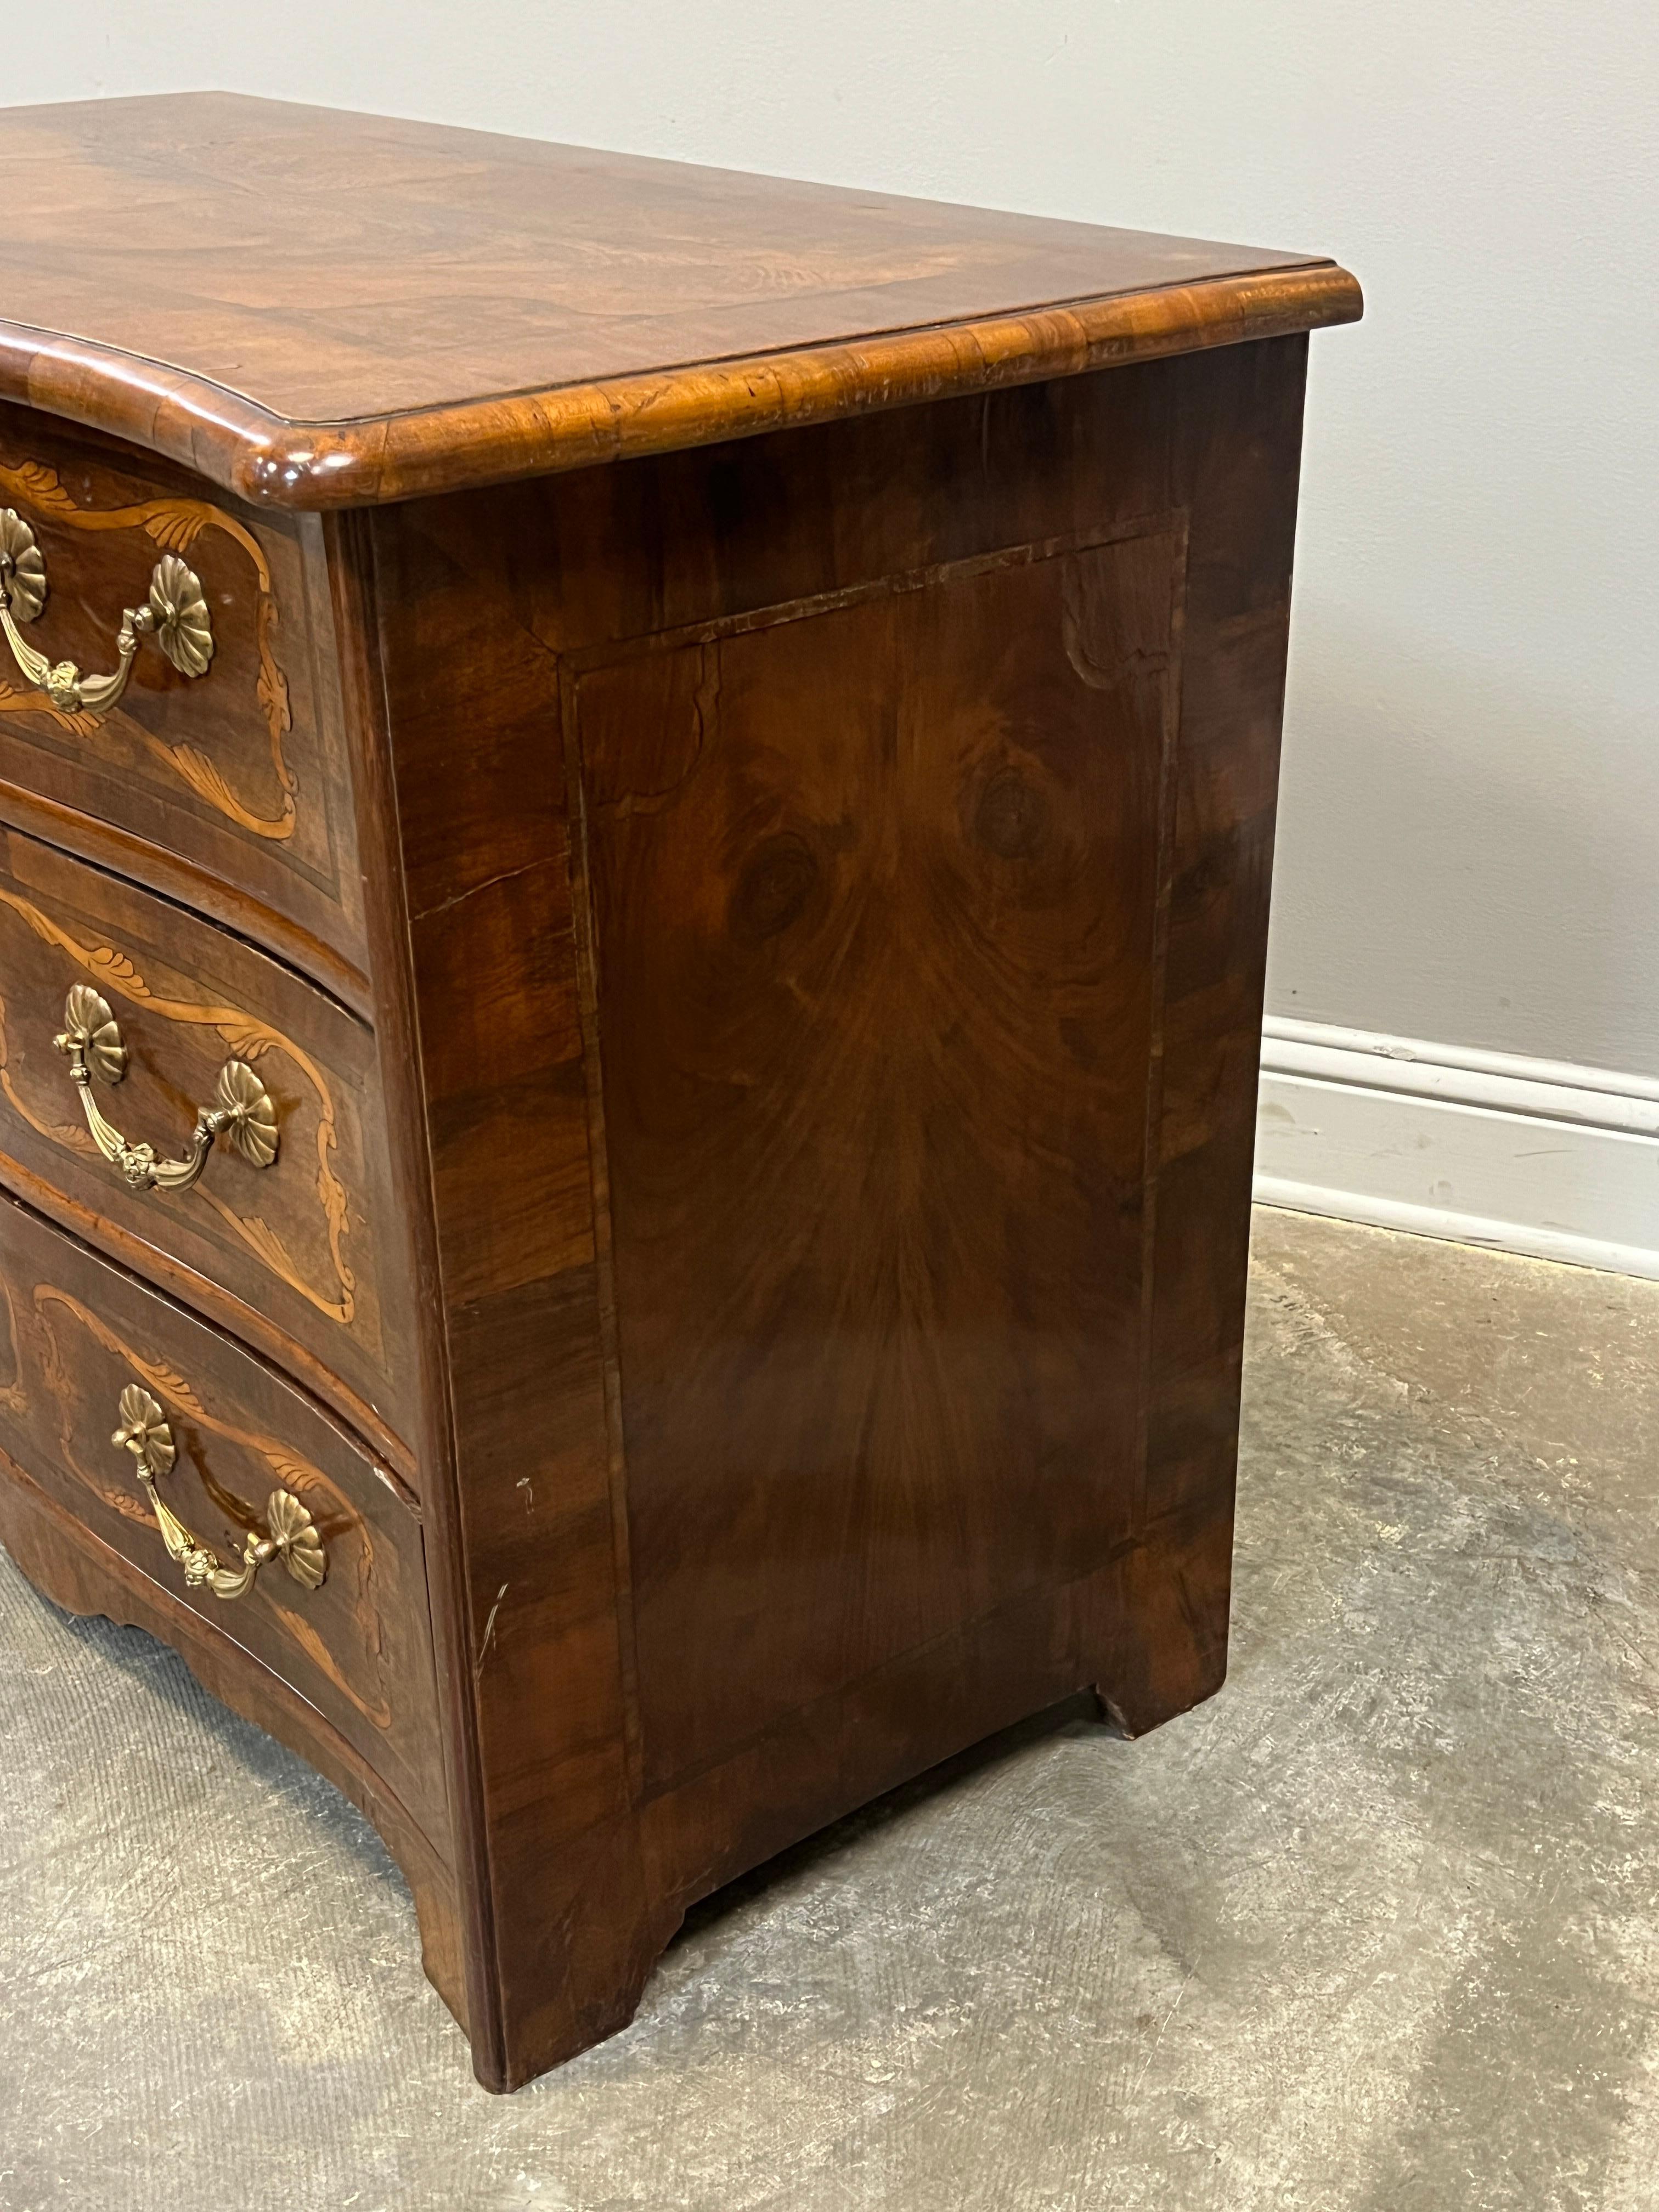 Beautifully hand made French commode in walnut with contrasting king wood marquetry designs and inlaid lozenge designs on drawers. Drawers are hand made and exhibit finer hand cut bevels. The original back is in pine and carefully beveled and